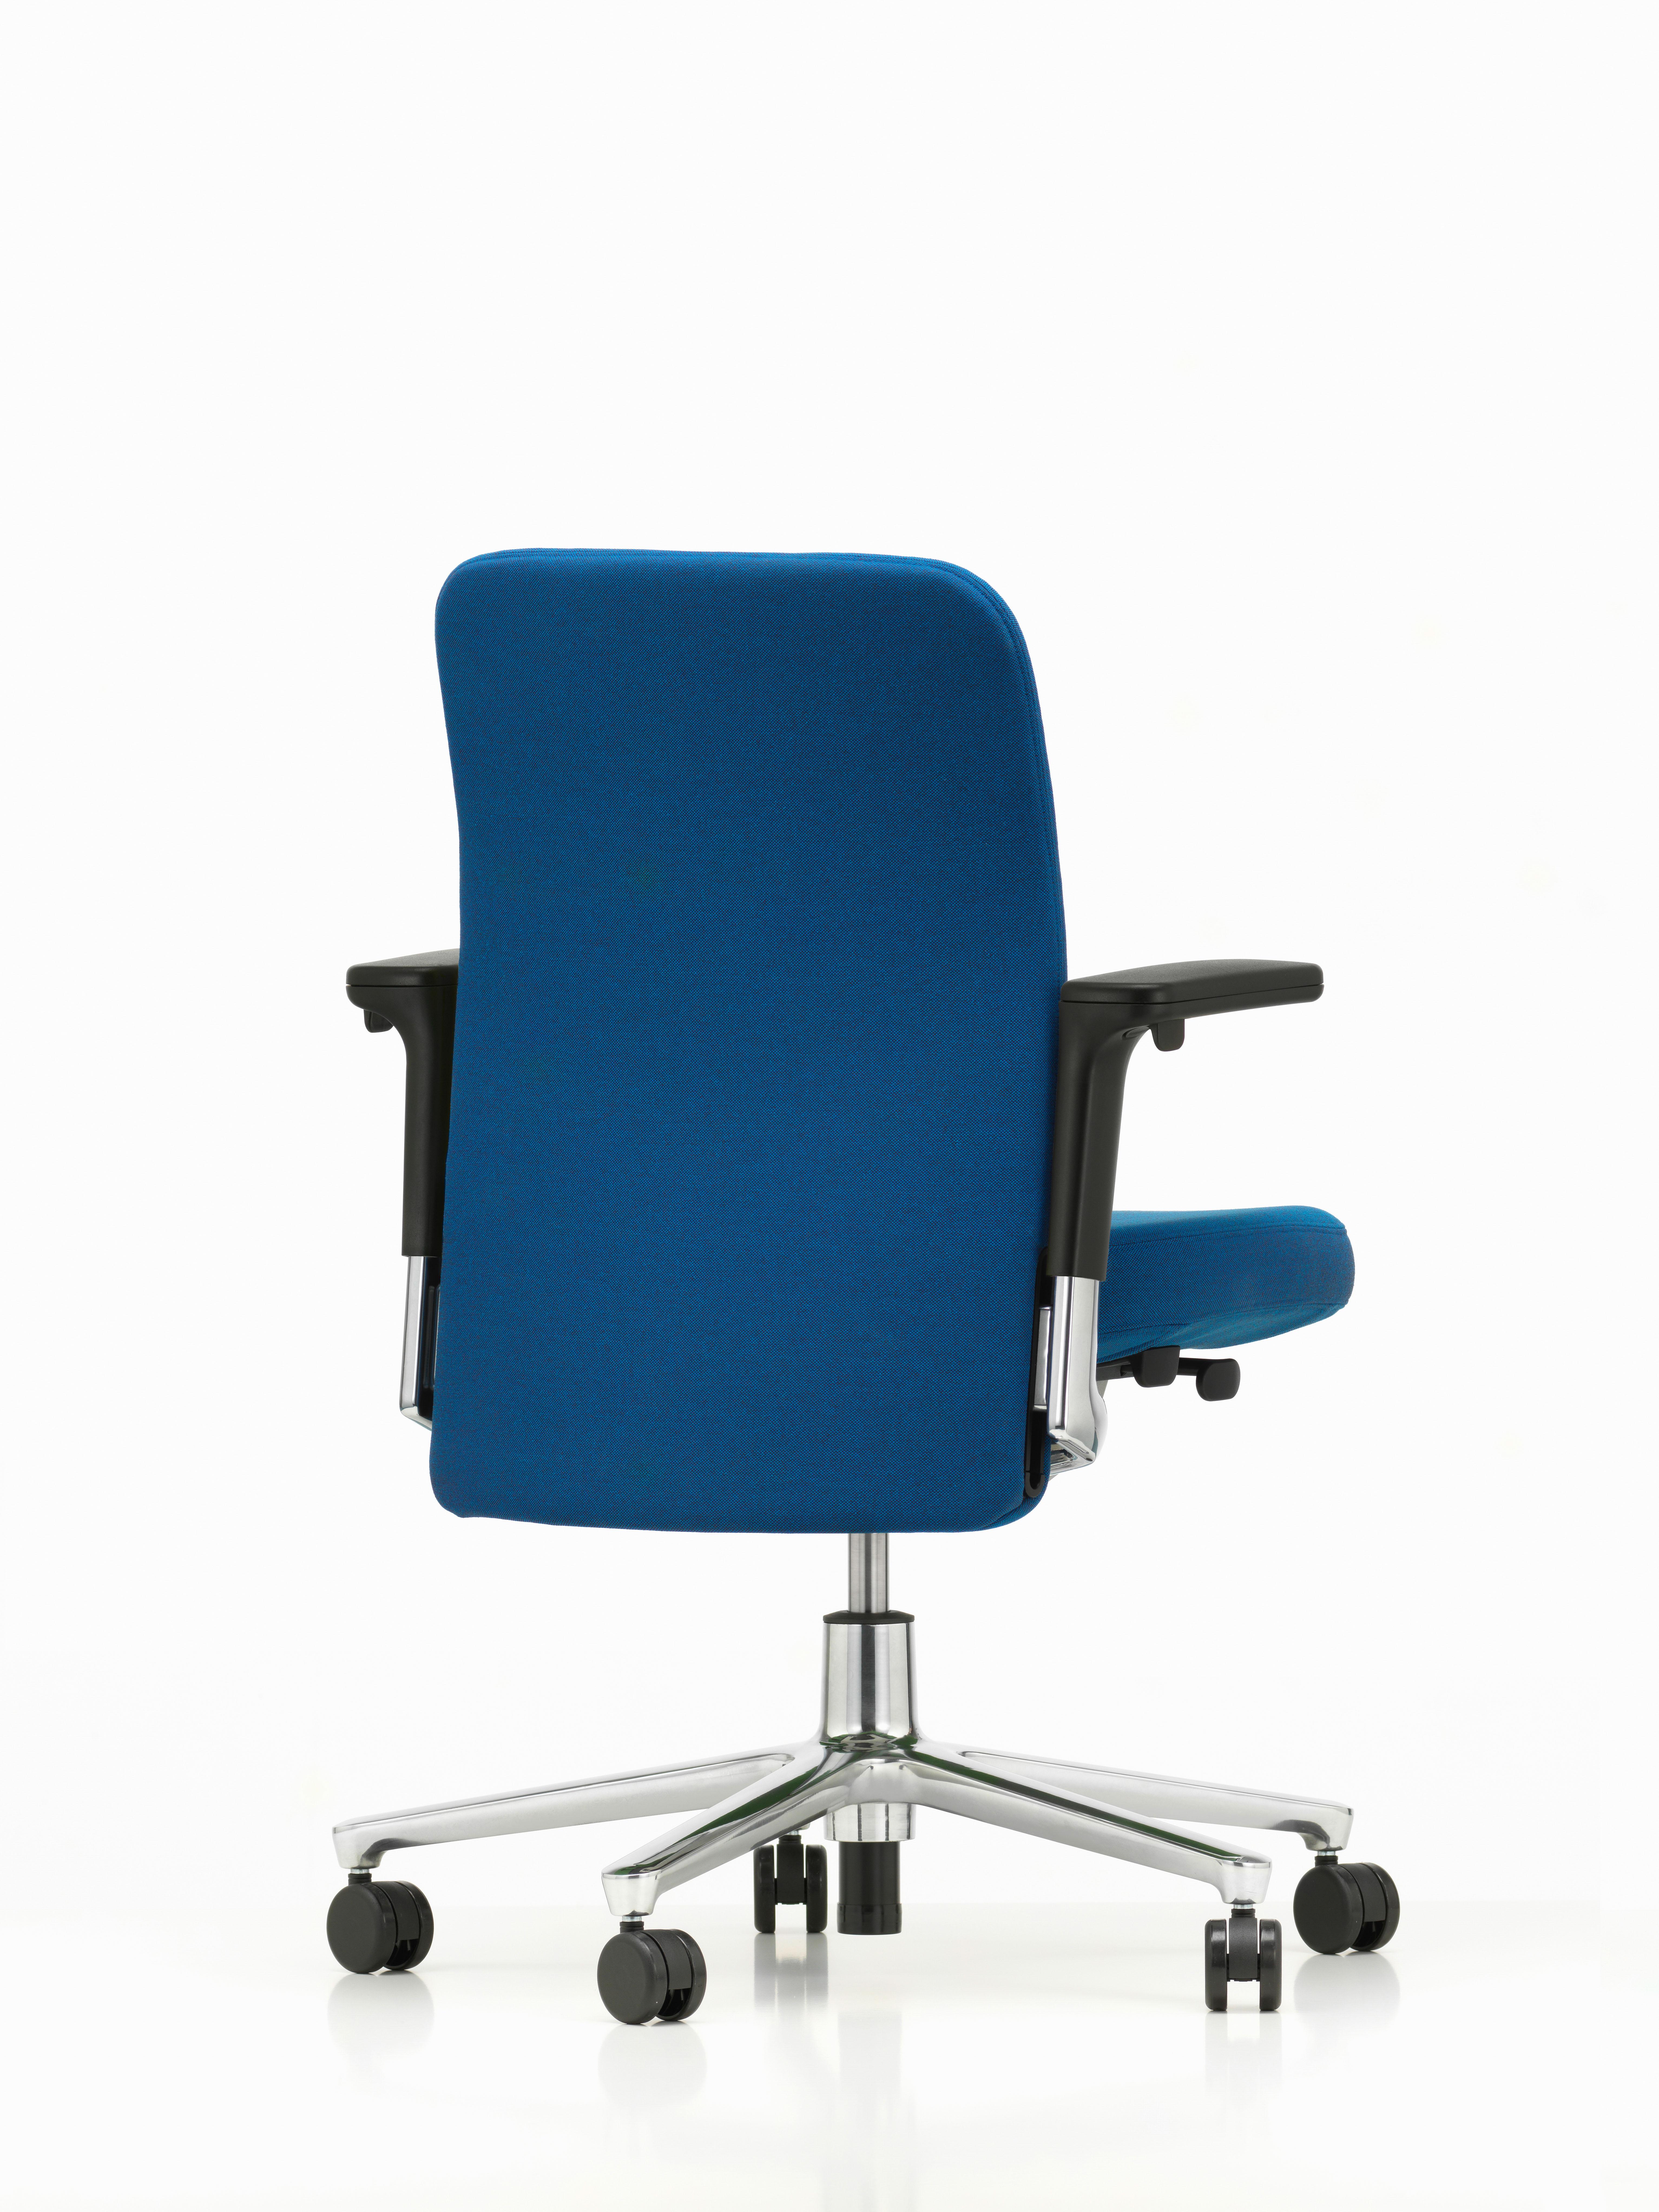 When equipped with a low backrest and adjustable neck cushion, the Pacific chair offers additional support in the upper spine. Its understated design has a distinguished aura and is therefore perfectly adapted to office environments with a